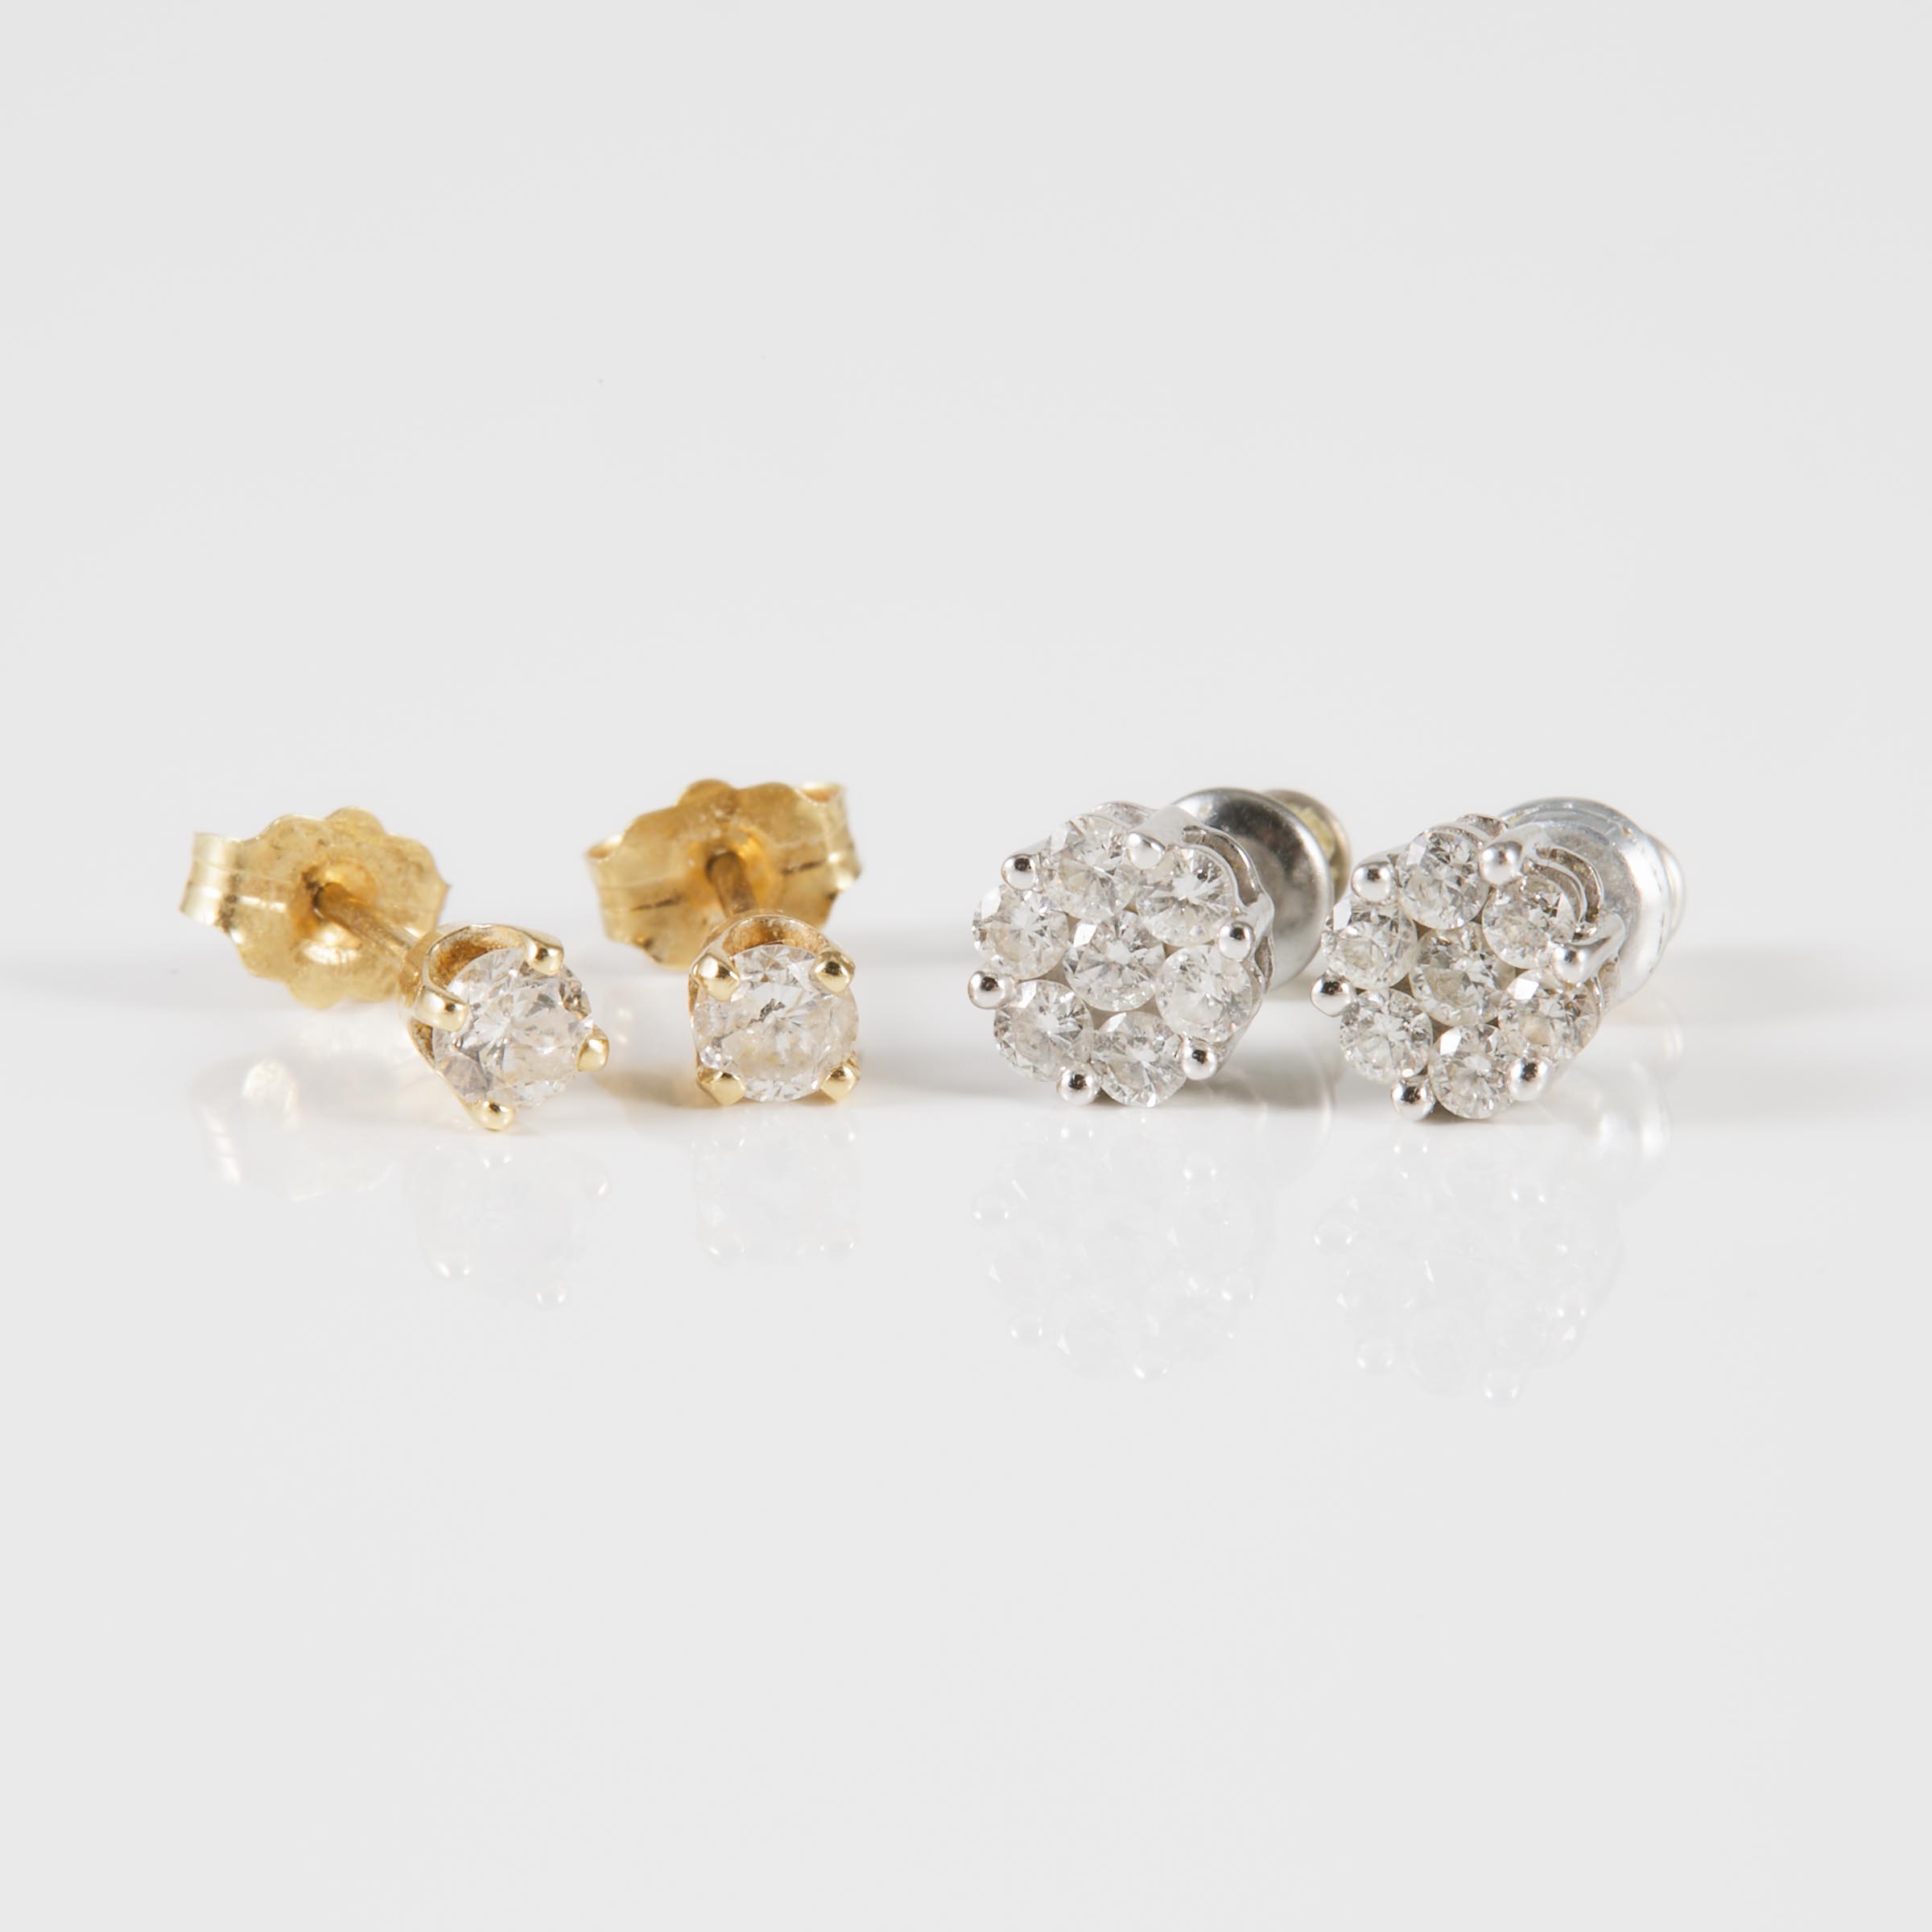 2 x 14k Yellow And White Gold Pairs Of Stud Earrings